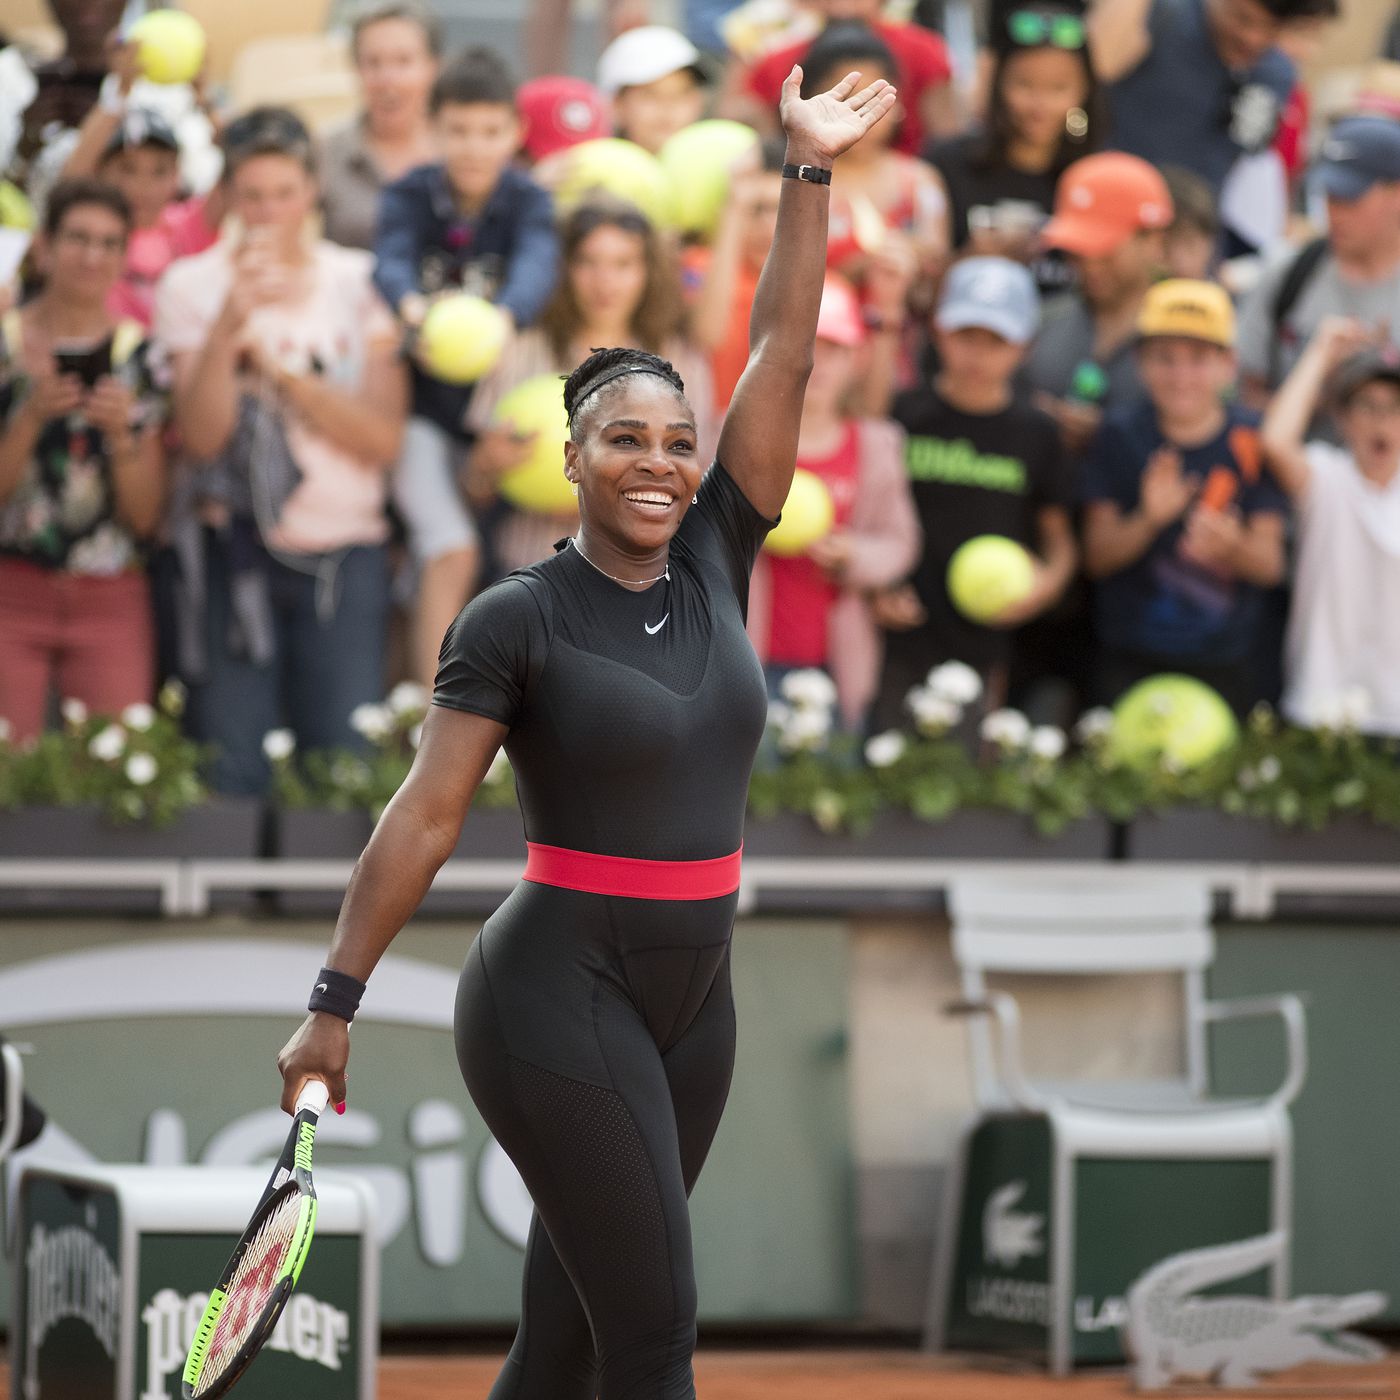 wagon Geologie Discipline The French Open's Serena Williams catsuit ban exposes tennis's elitism - Vox